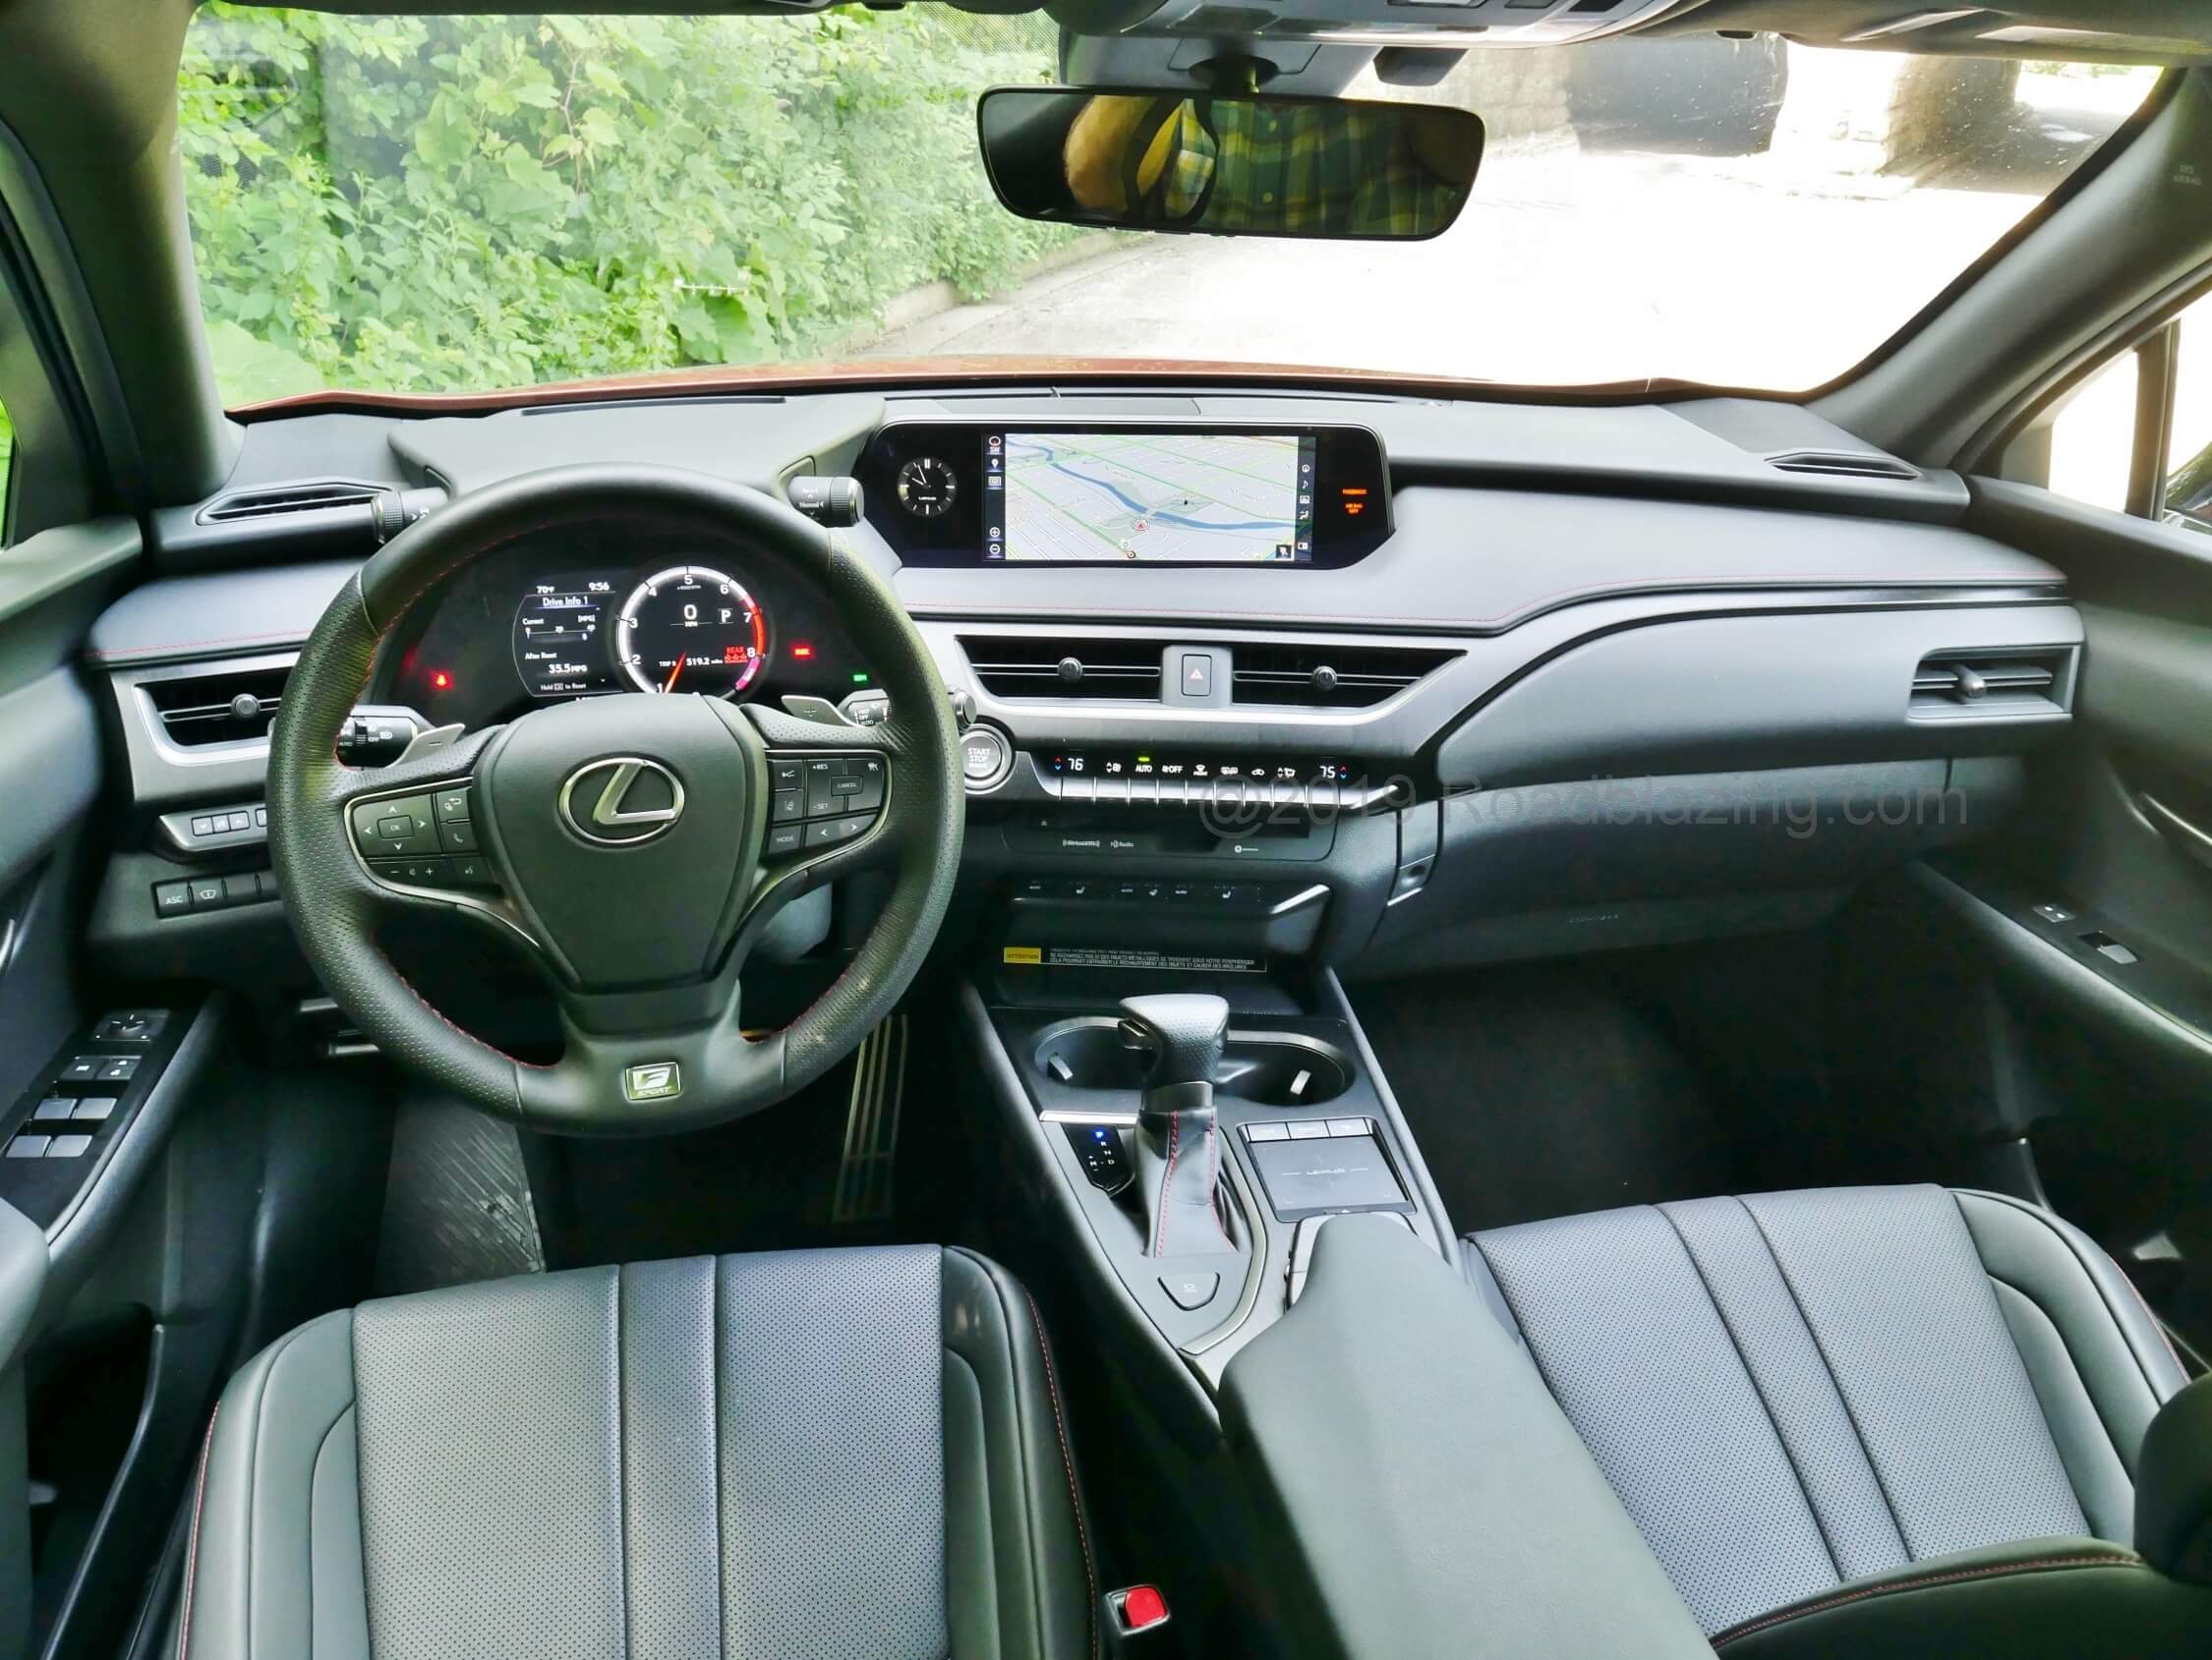 2019 Lexus UX 200 F-Sport: Cabin combines precision crafting, aesthetic layering and a good measure of modernity, with a huge center dashtop 10.3" split LCD infotainment/ navigation screen.